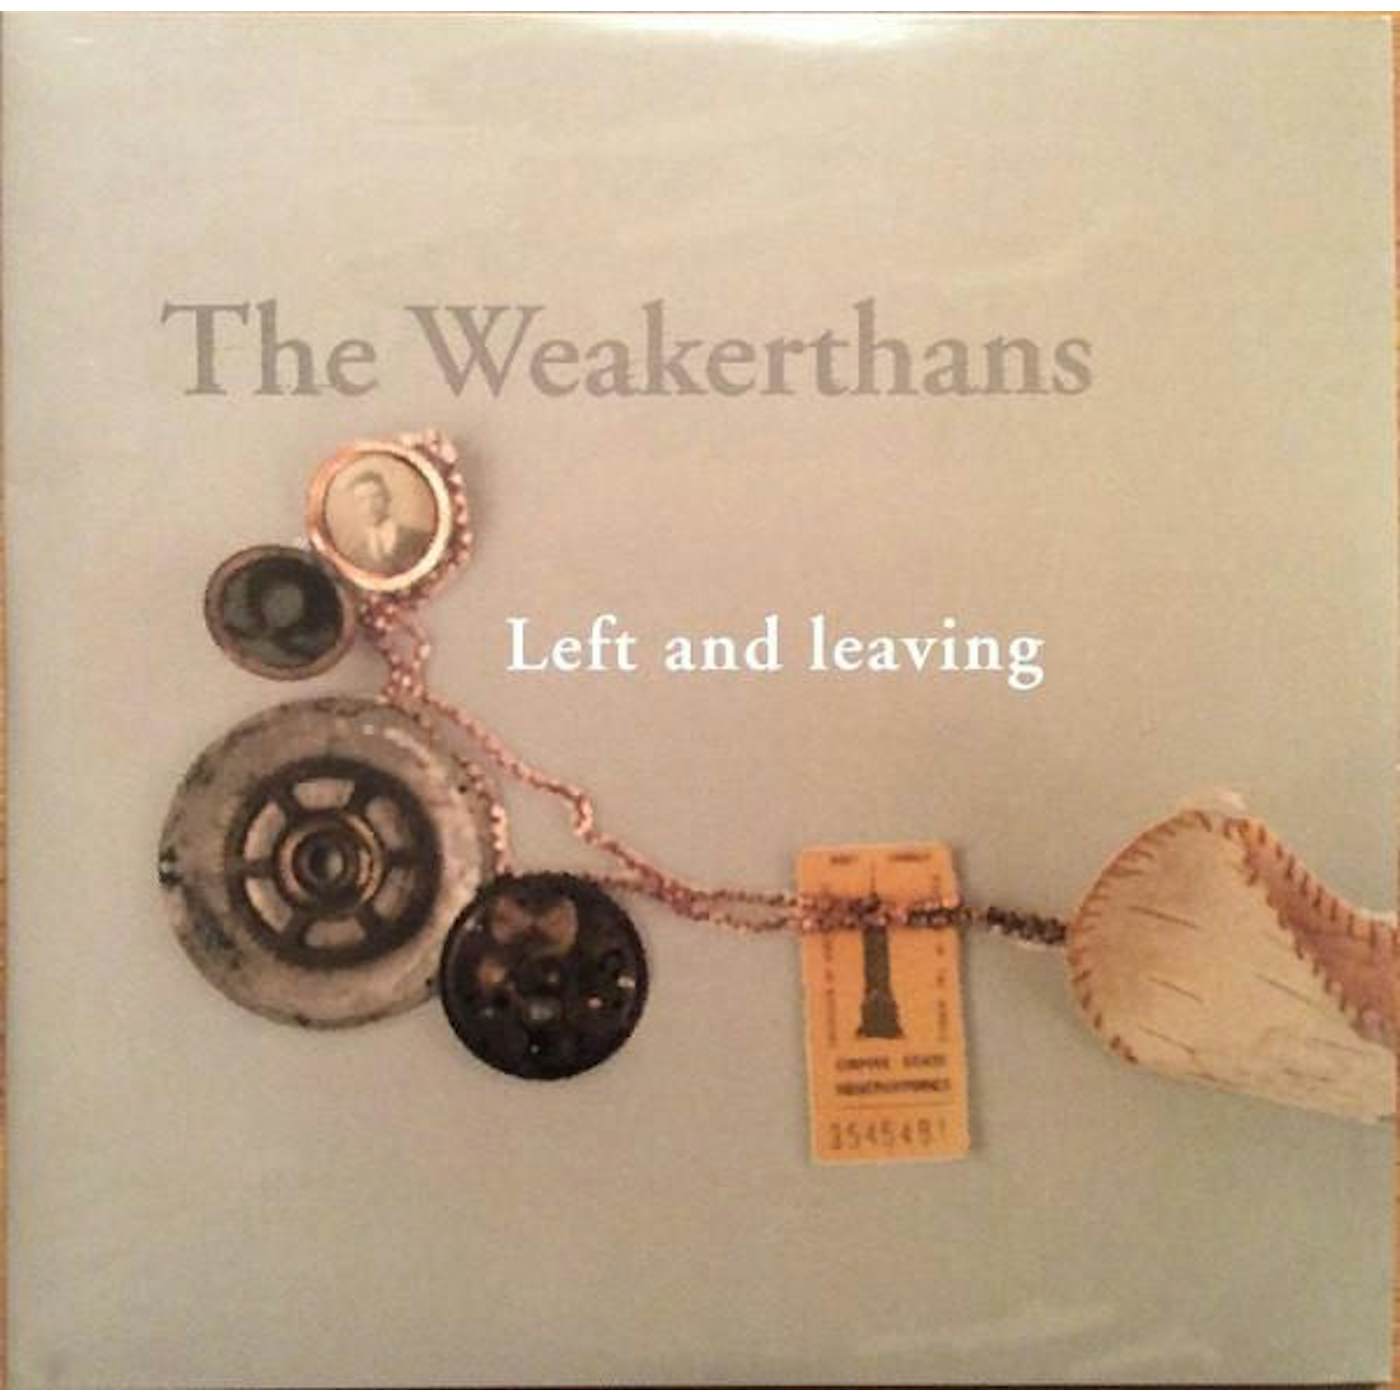 The Weakerthans Left and Leaving Vinyl Record